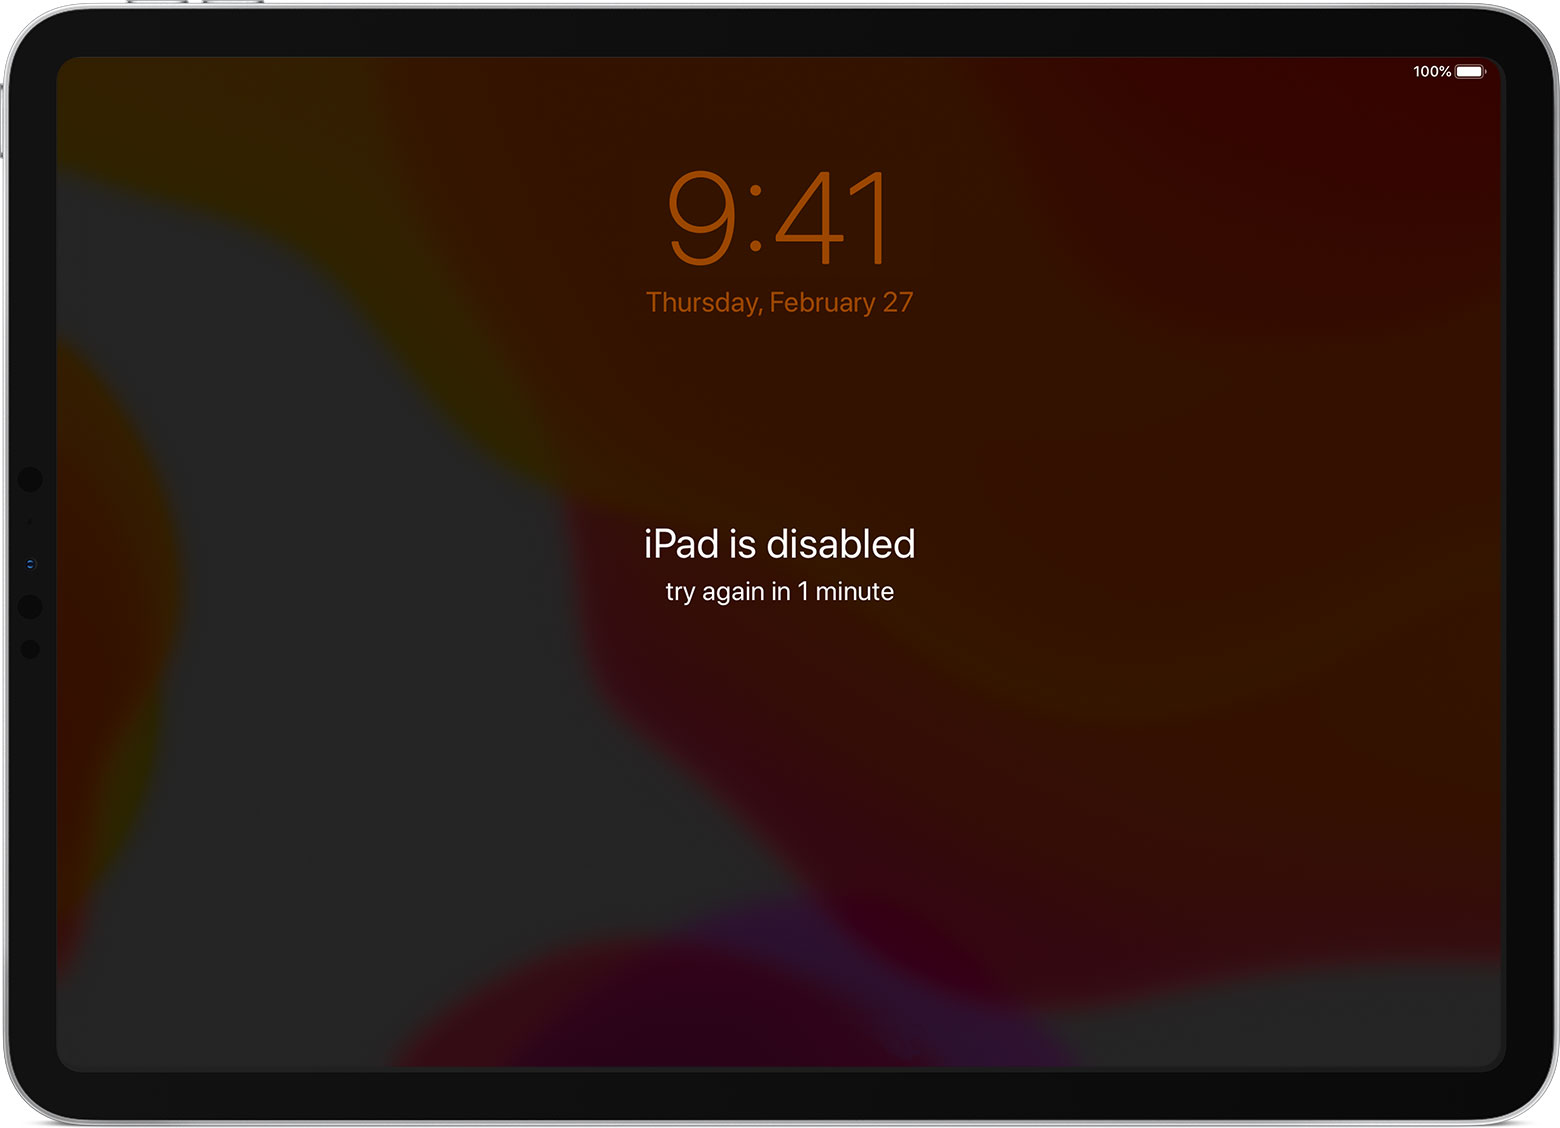 ipad disabled by entering wrong passcode